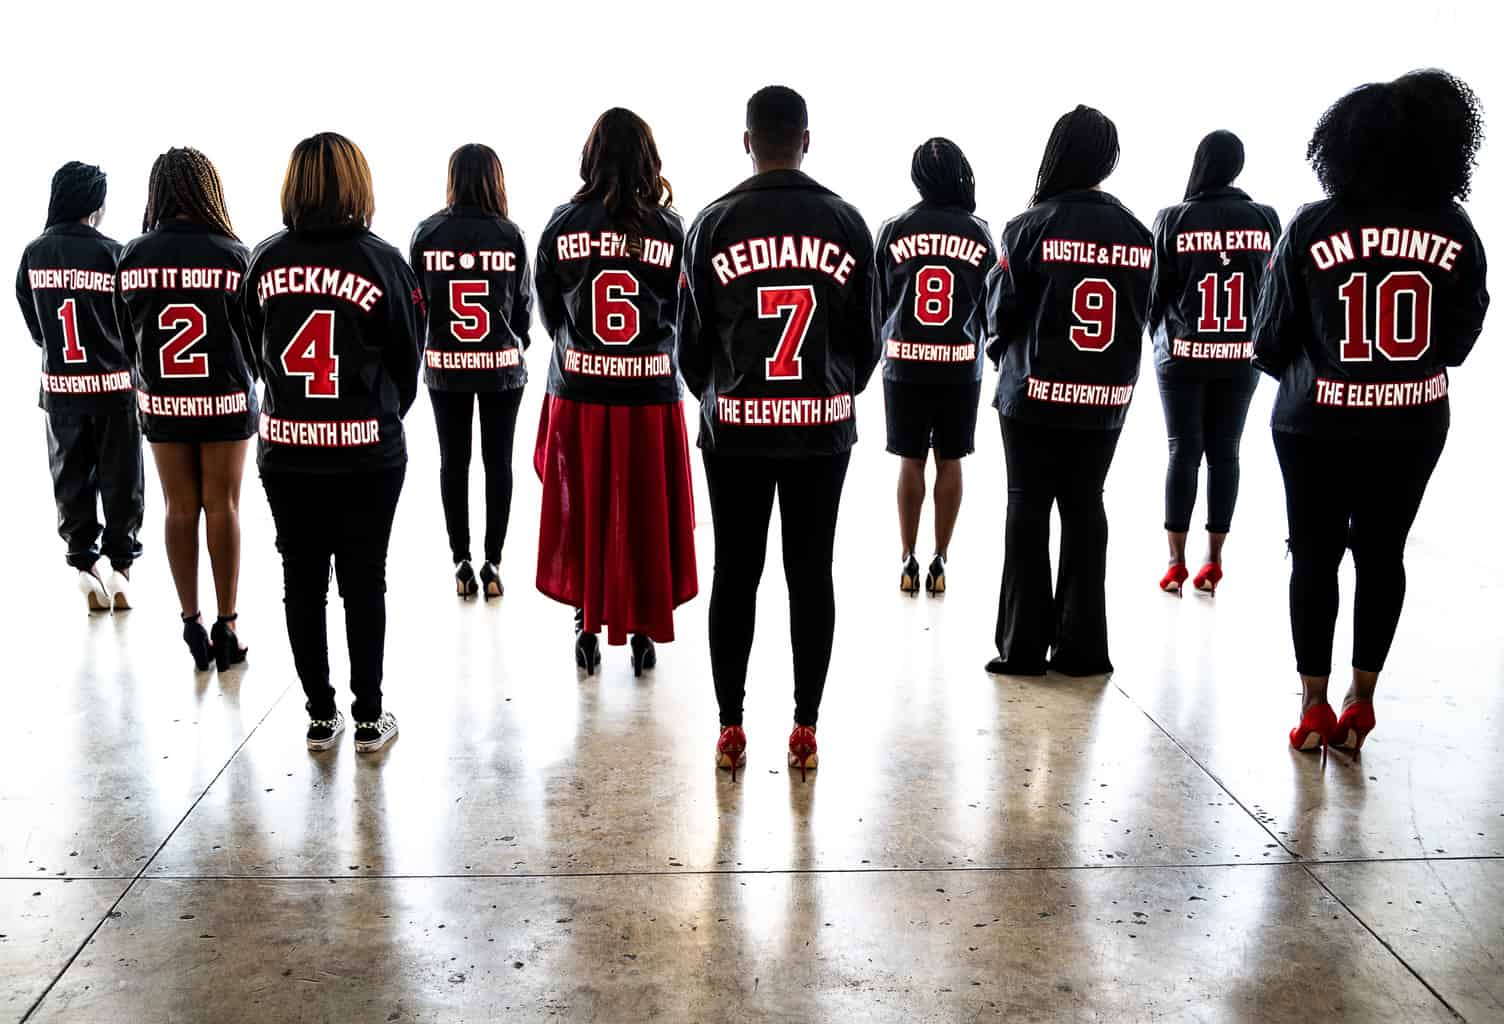 These Alumnae Deltas from Los Angeles County Did A Stunning Photo Shoot ...